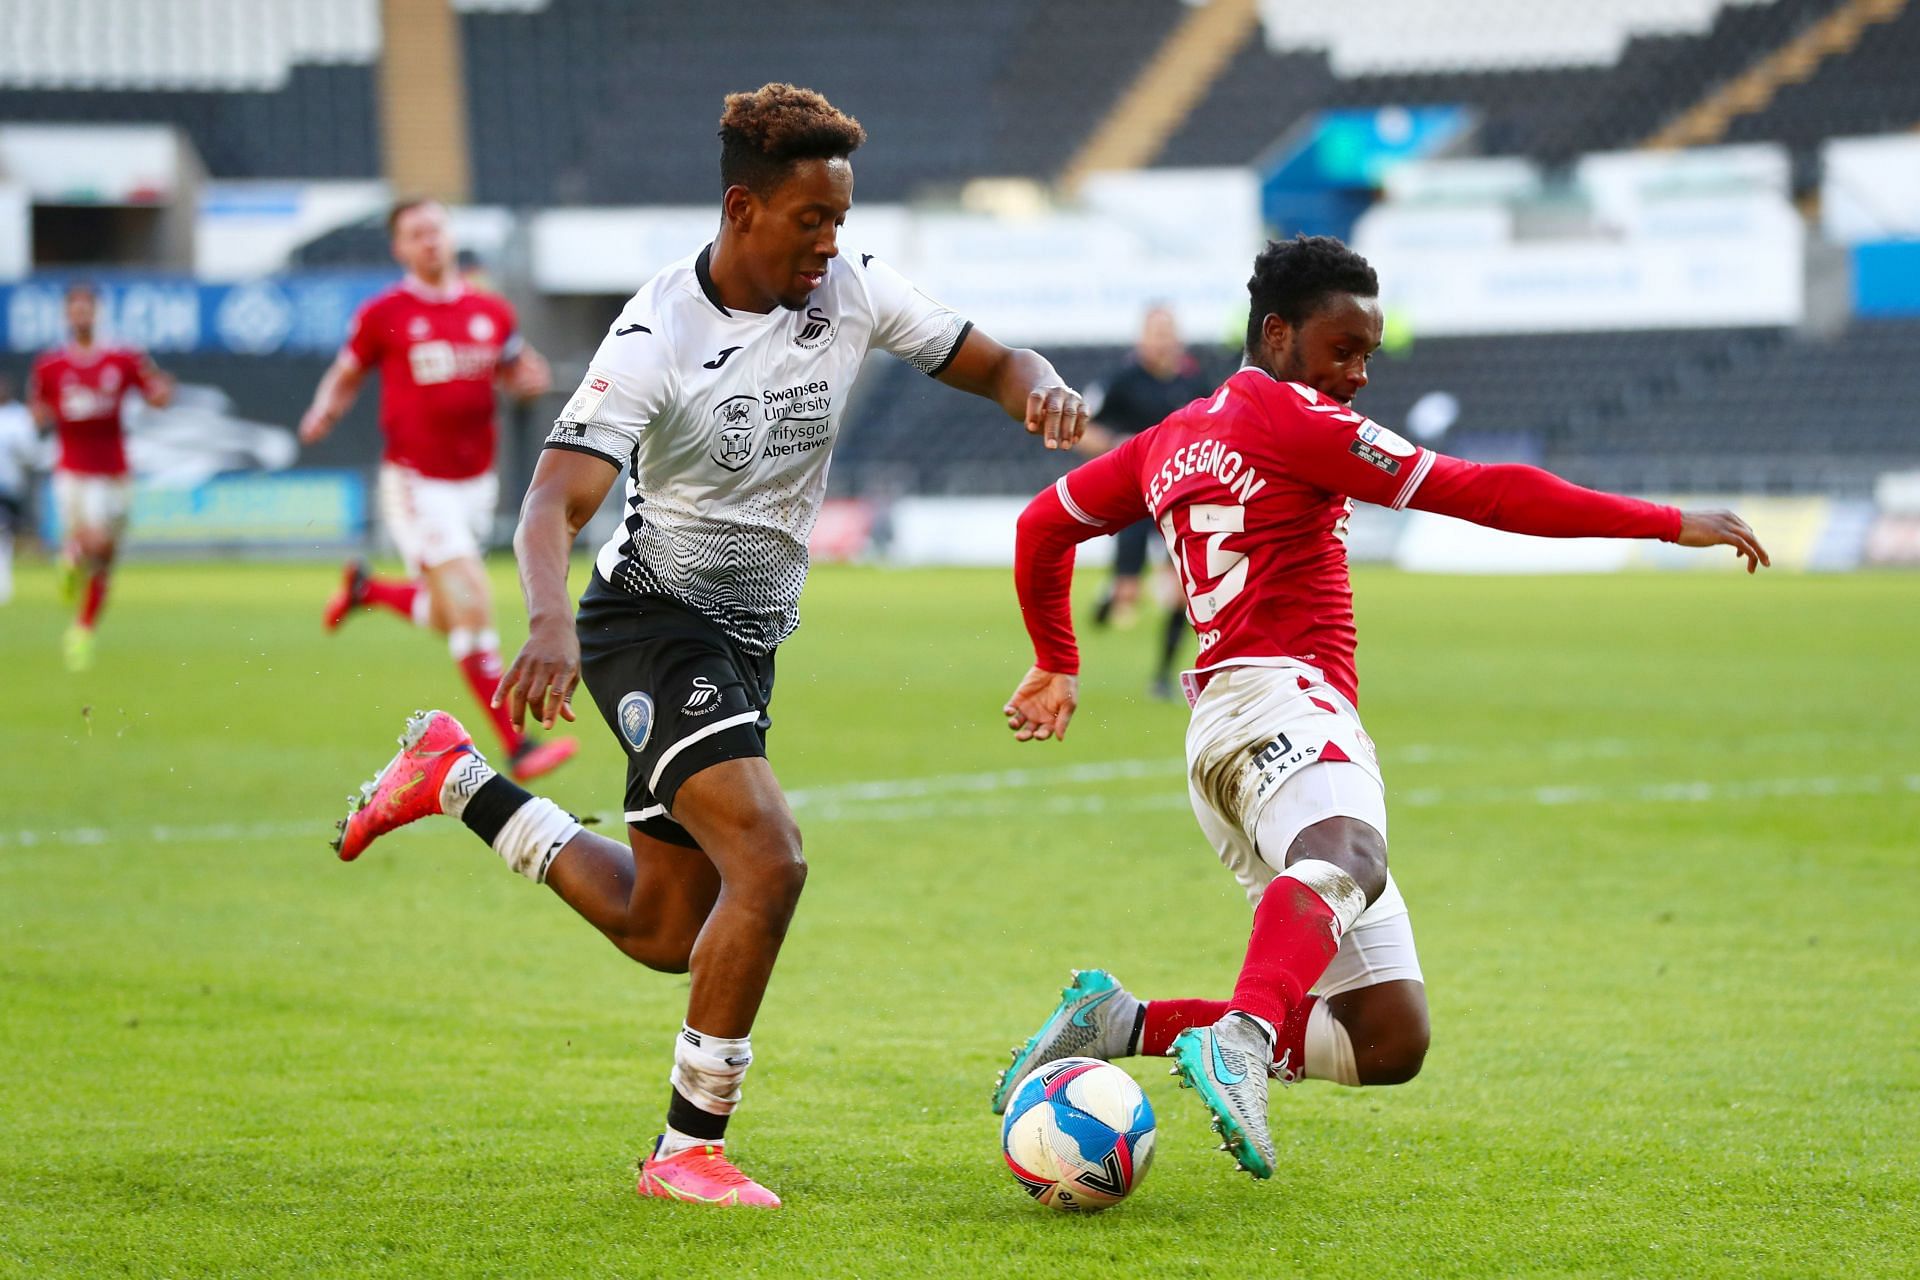 Swansea City and Bristol City square off on Sunday